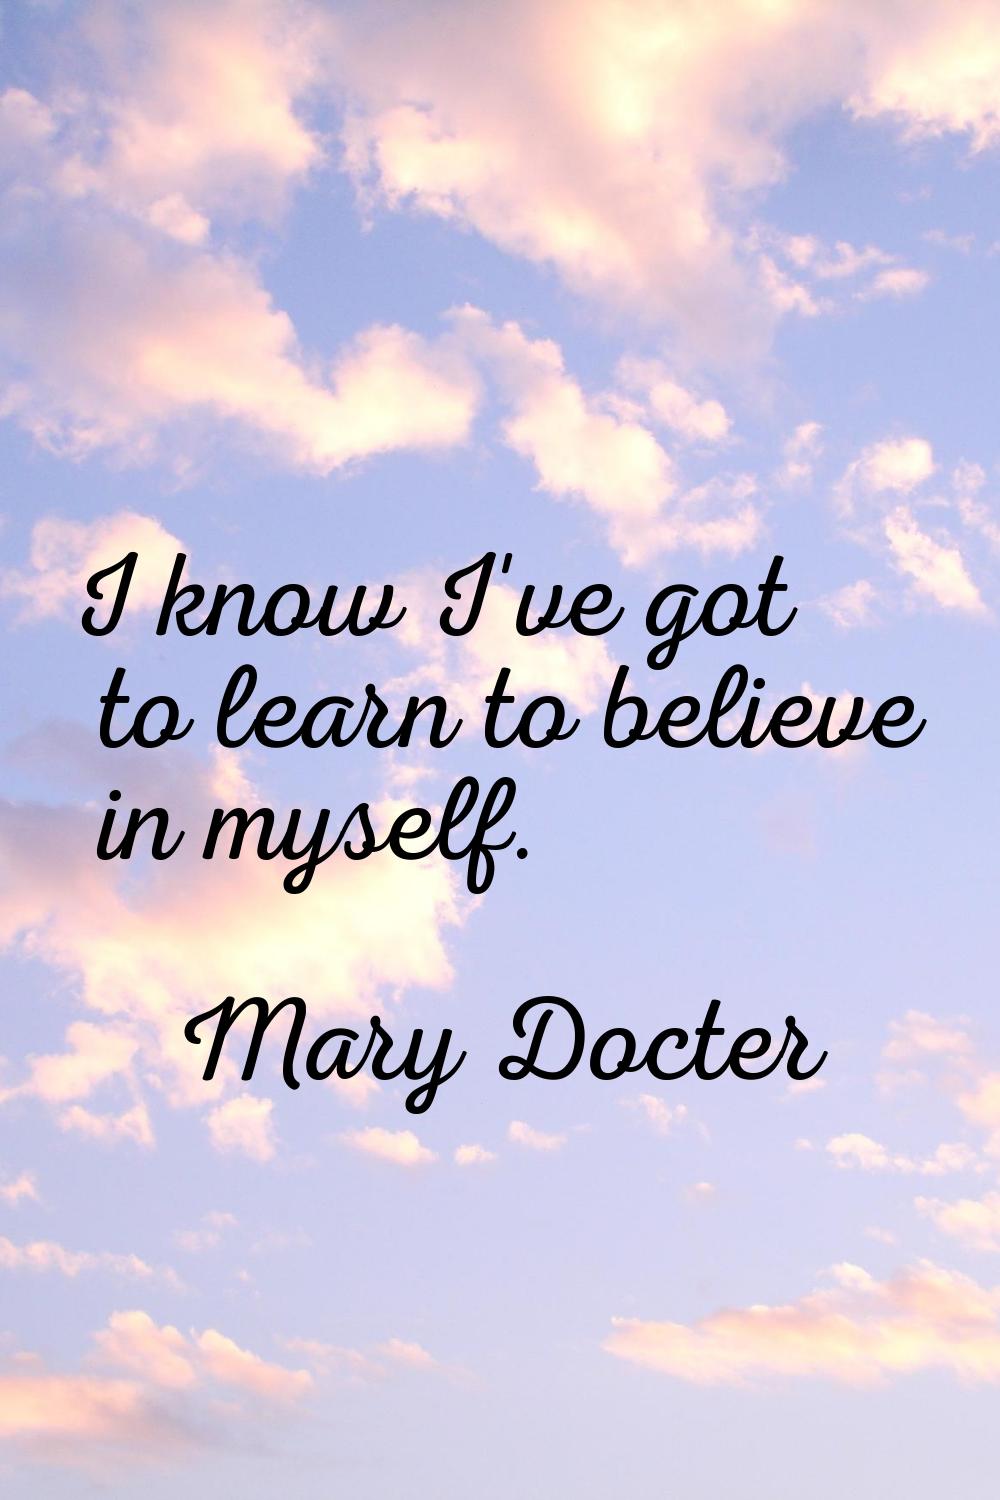 I know I've got to learn to believe in myself.